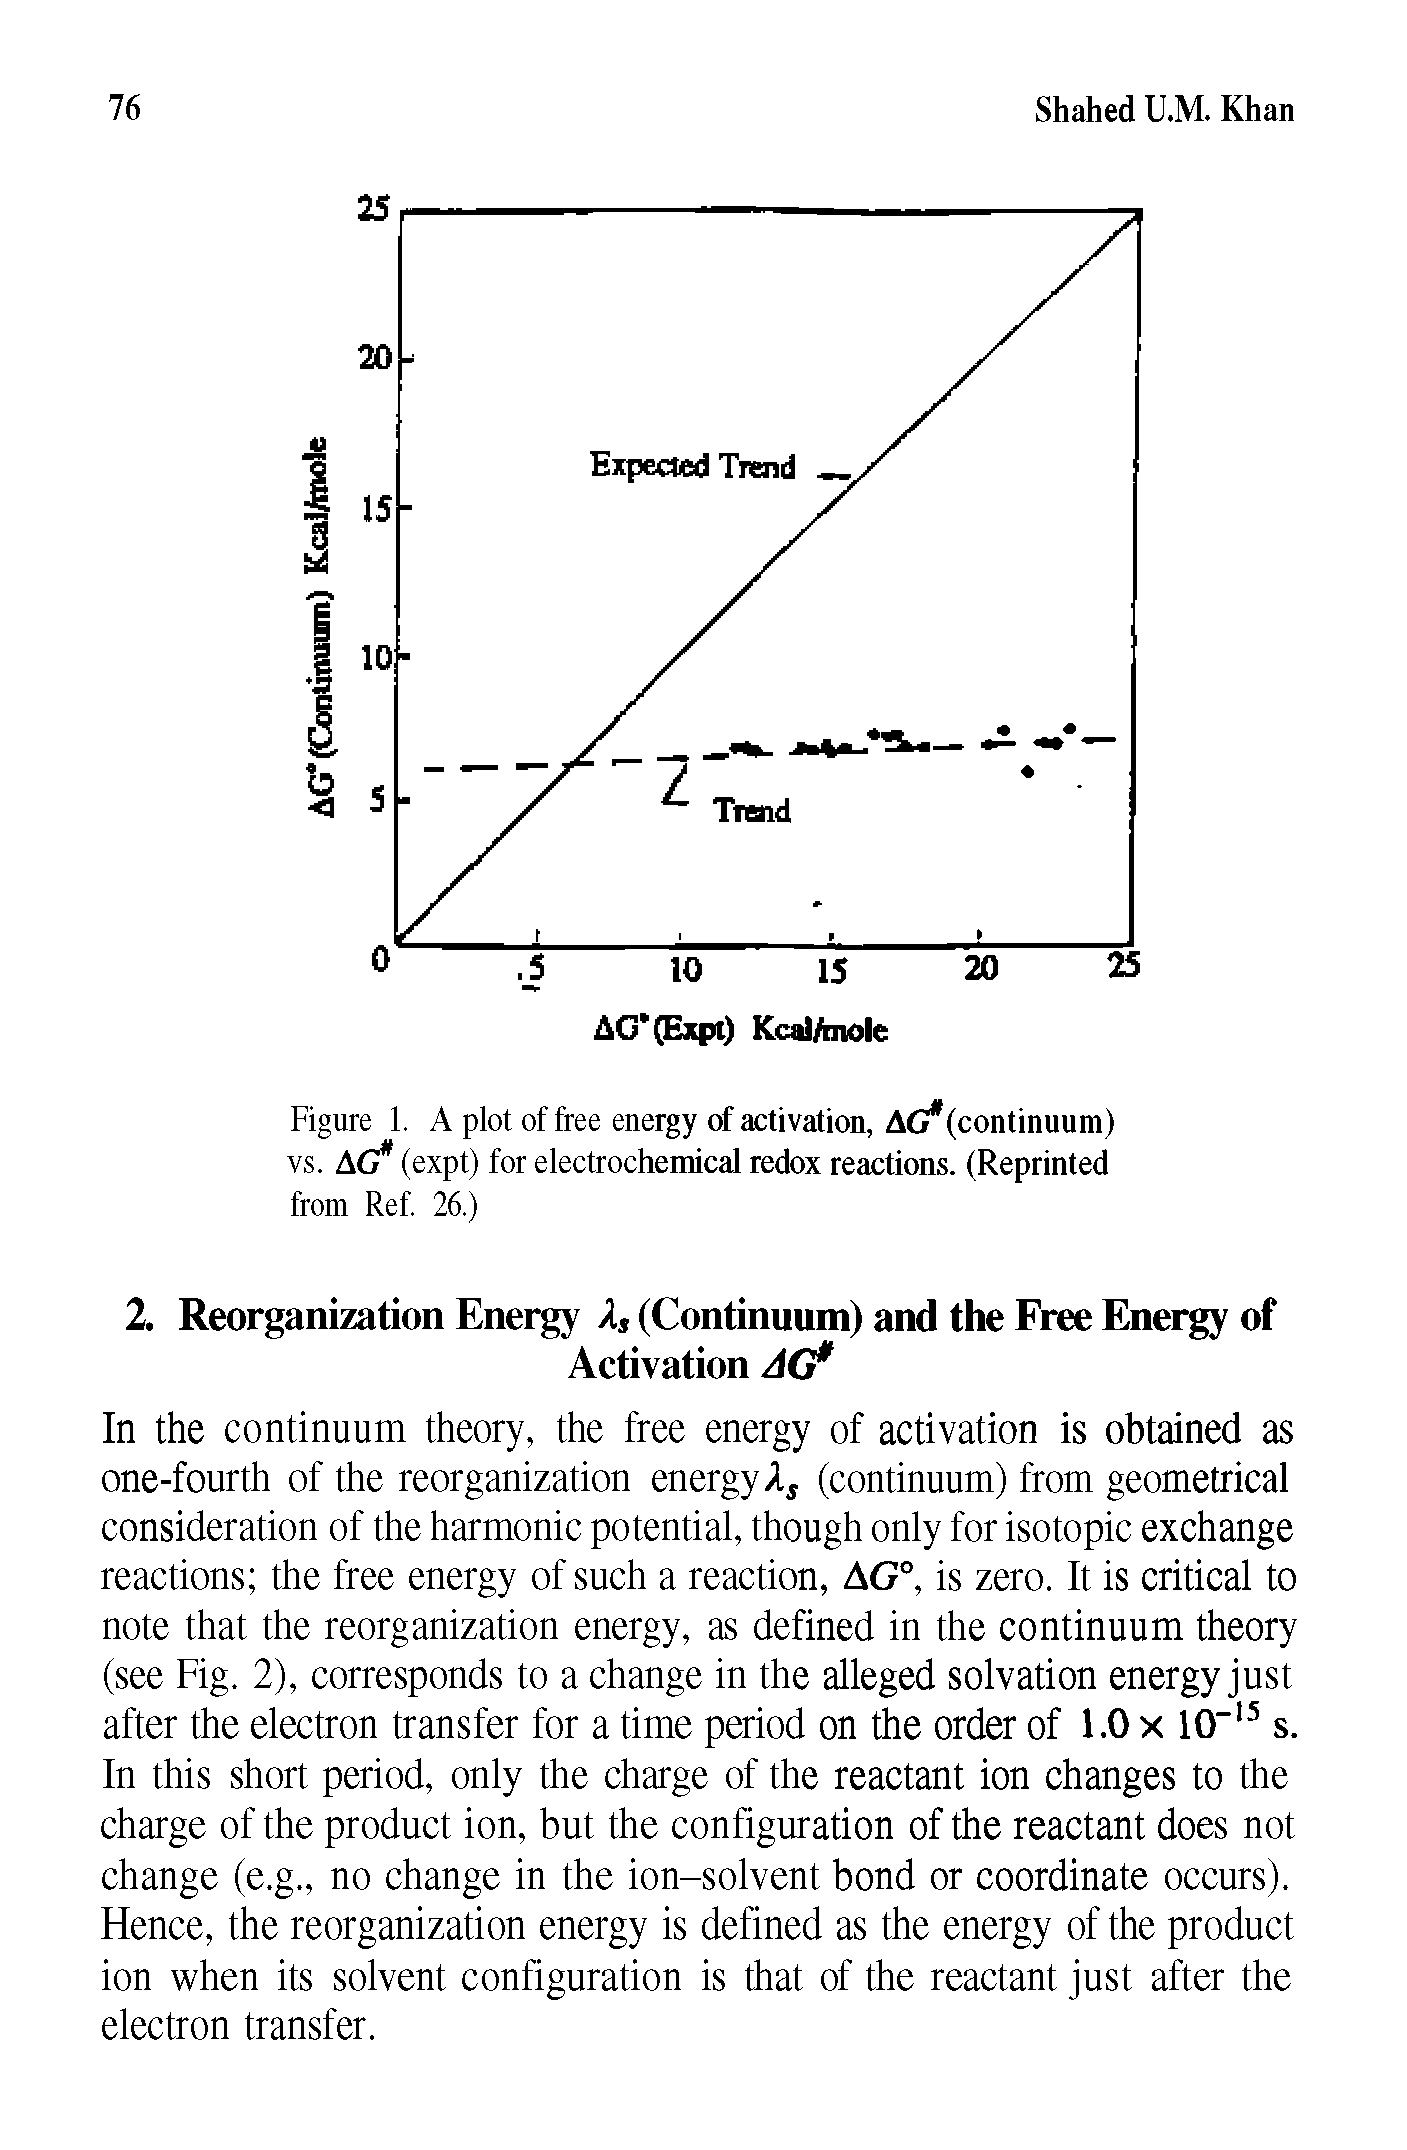 Figure 1. A plot of free energy of activation, AG (continuum) vs. AG (expt) for electrochemical redox reactions. (Reprinted from Ref 26.)...